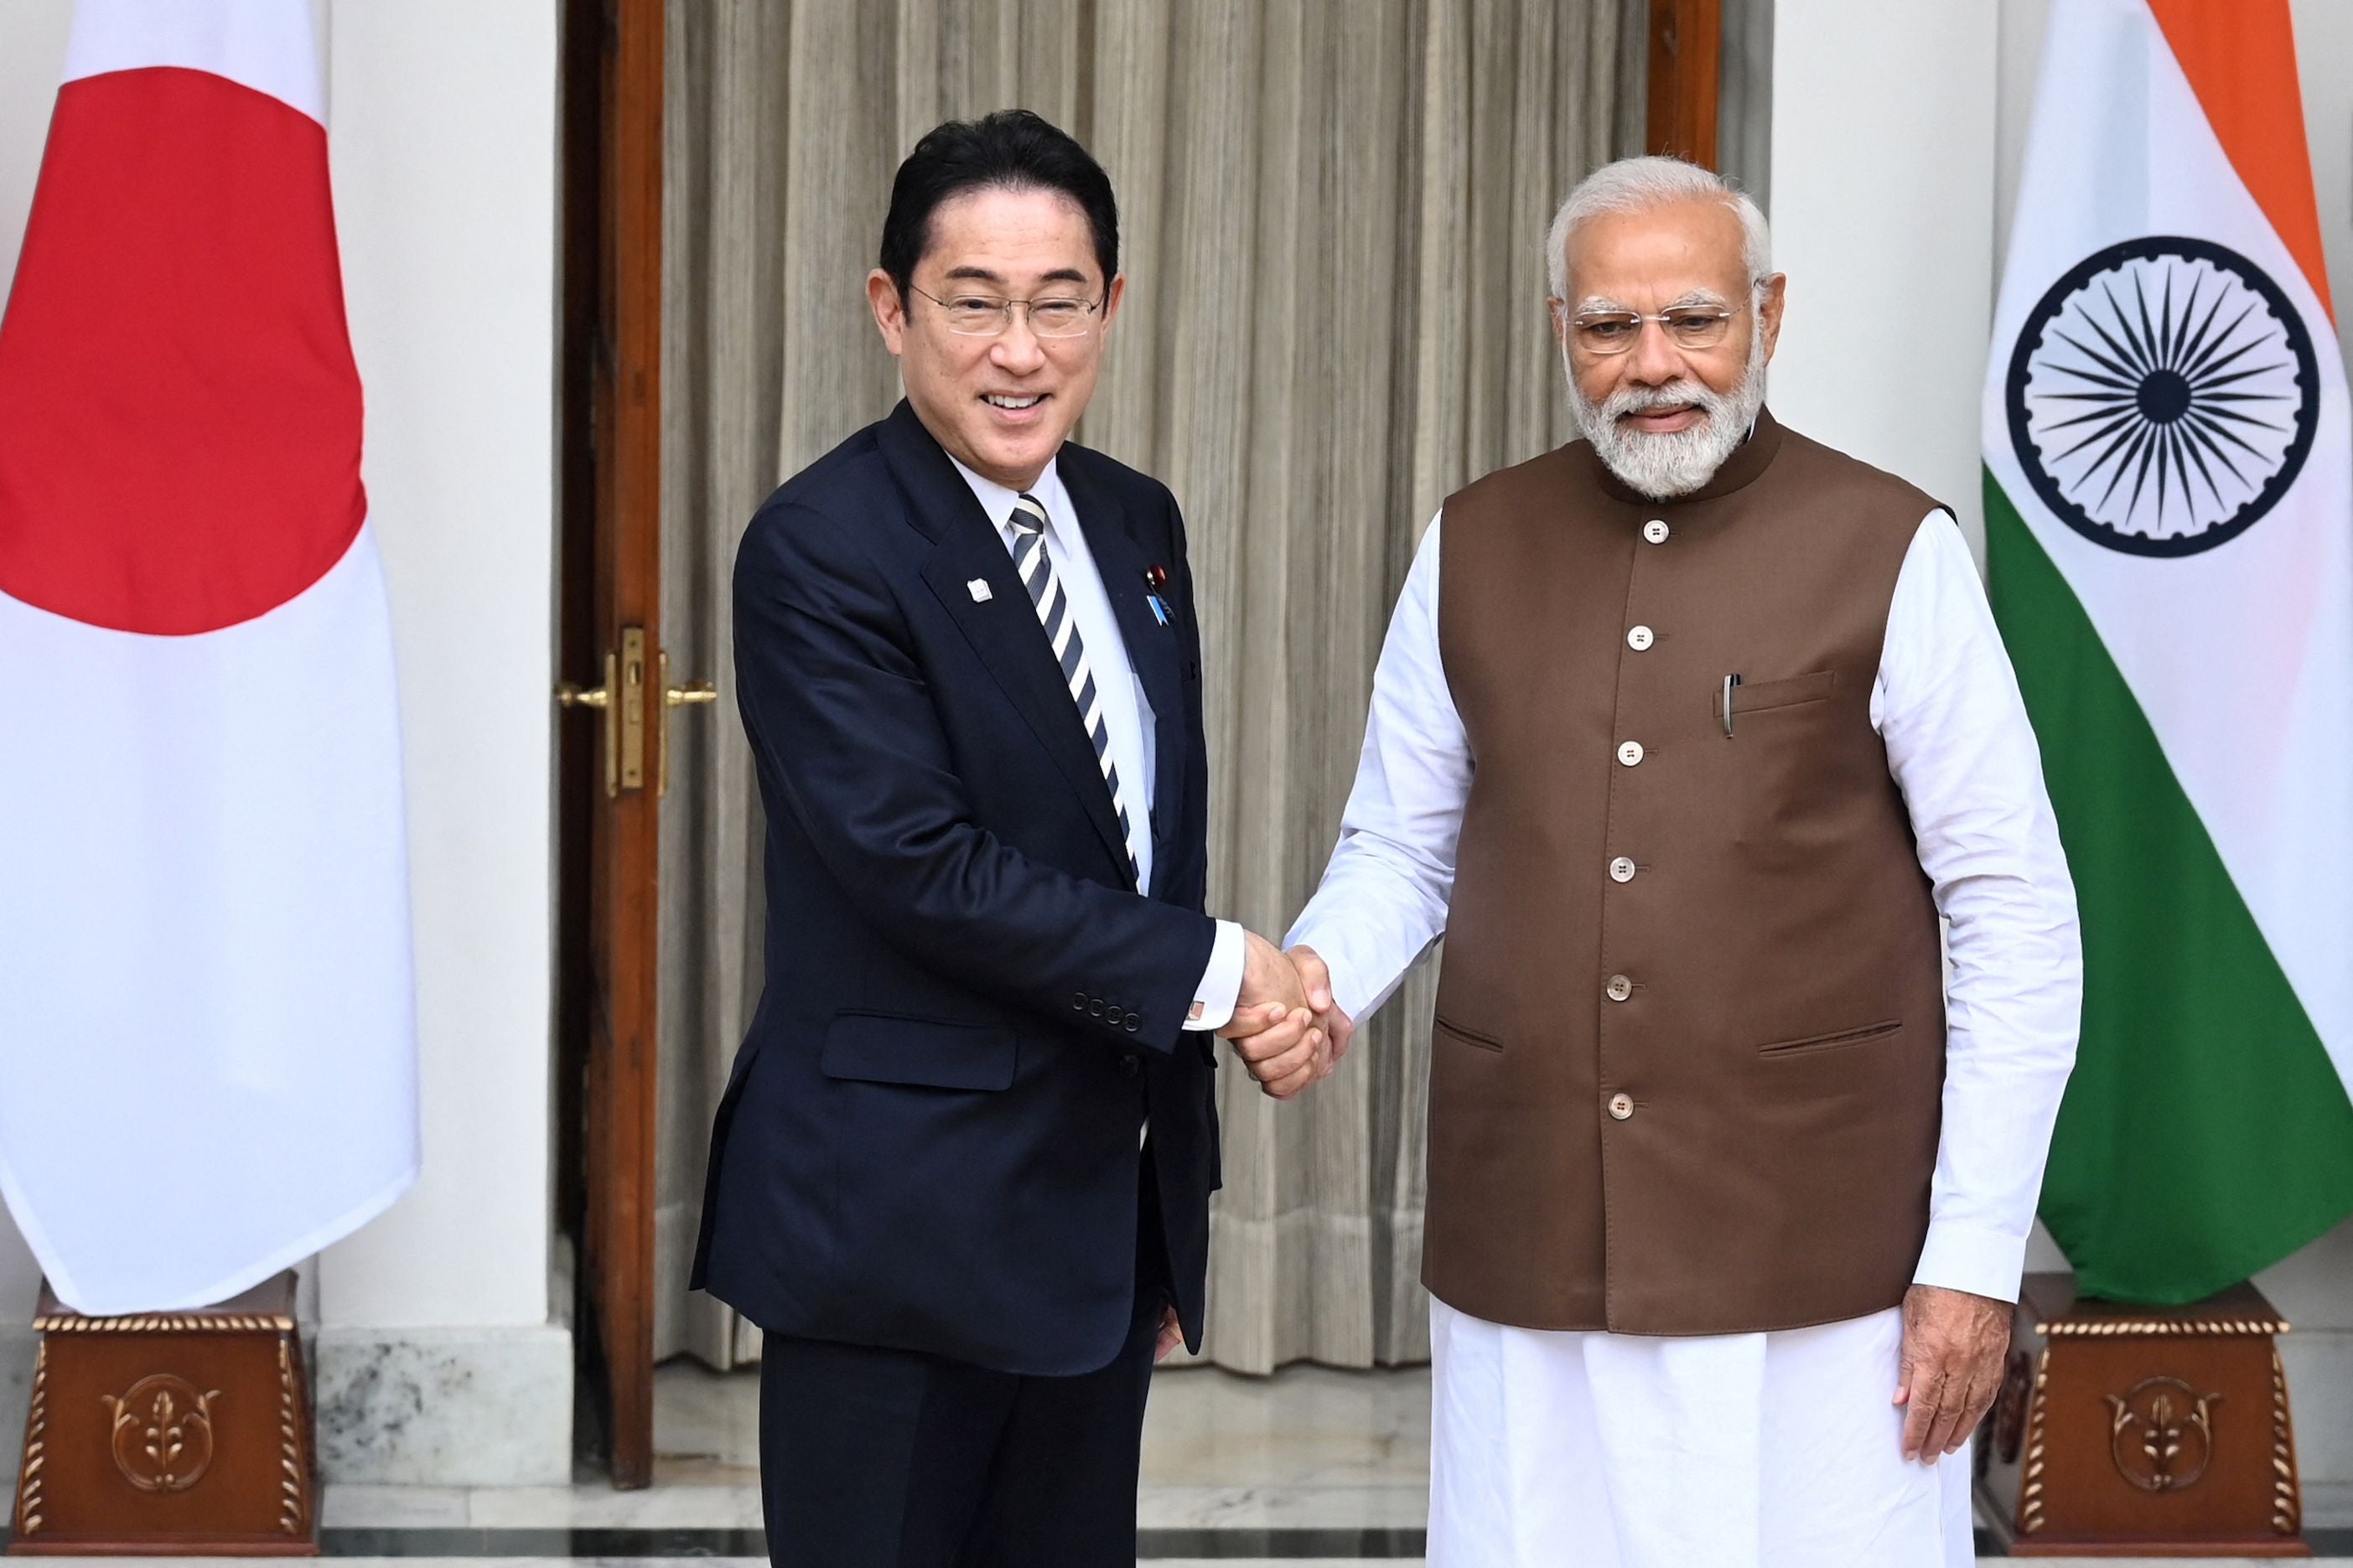 Japan’s Prime Minister Fumio Kishida (left) shakes hands with his Indian counterpart Narendra Modi before their meeting at the Hyderabad House in New Delhi on 20 March